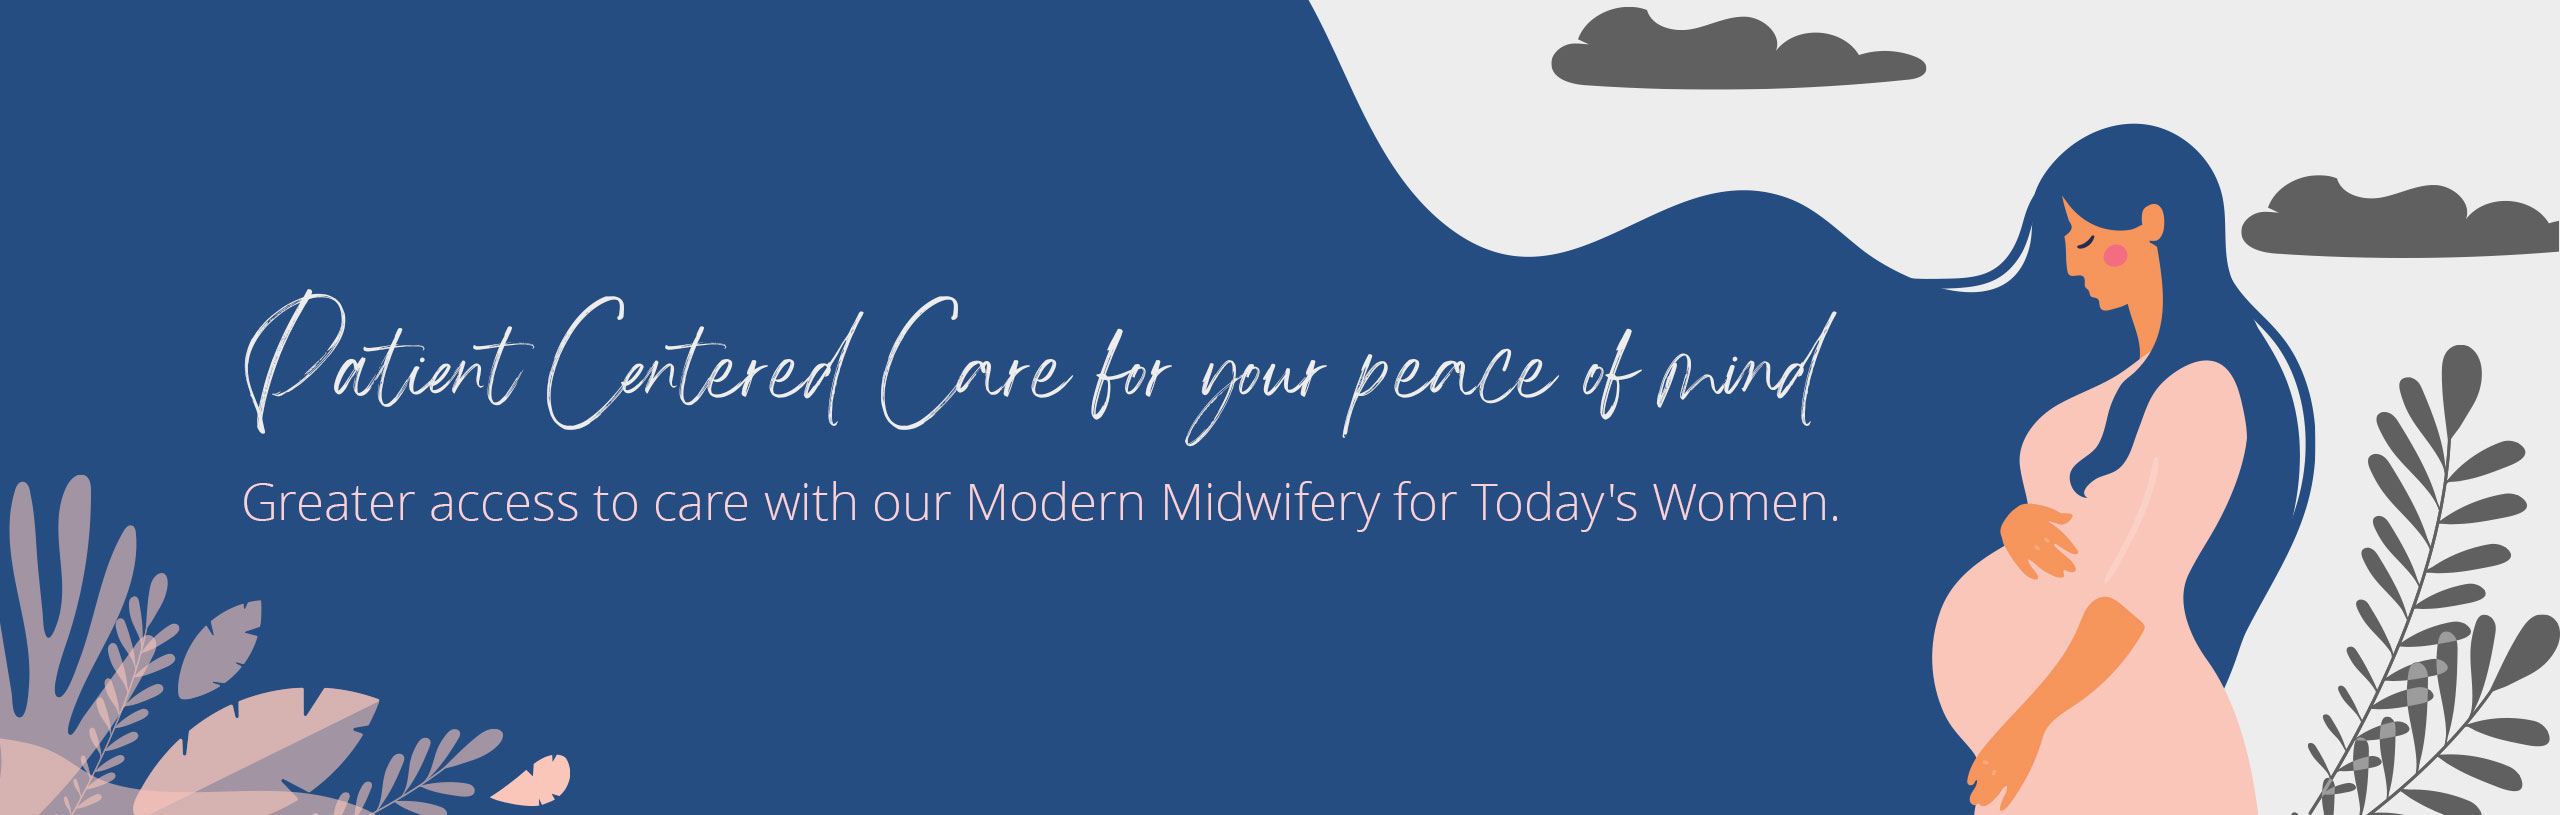 Family Focused for your peace of mind\Greater access to care with our Modern Midwifery for Today's Women.